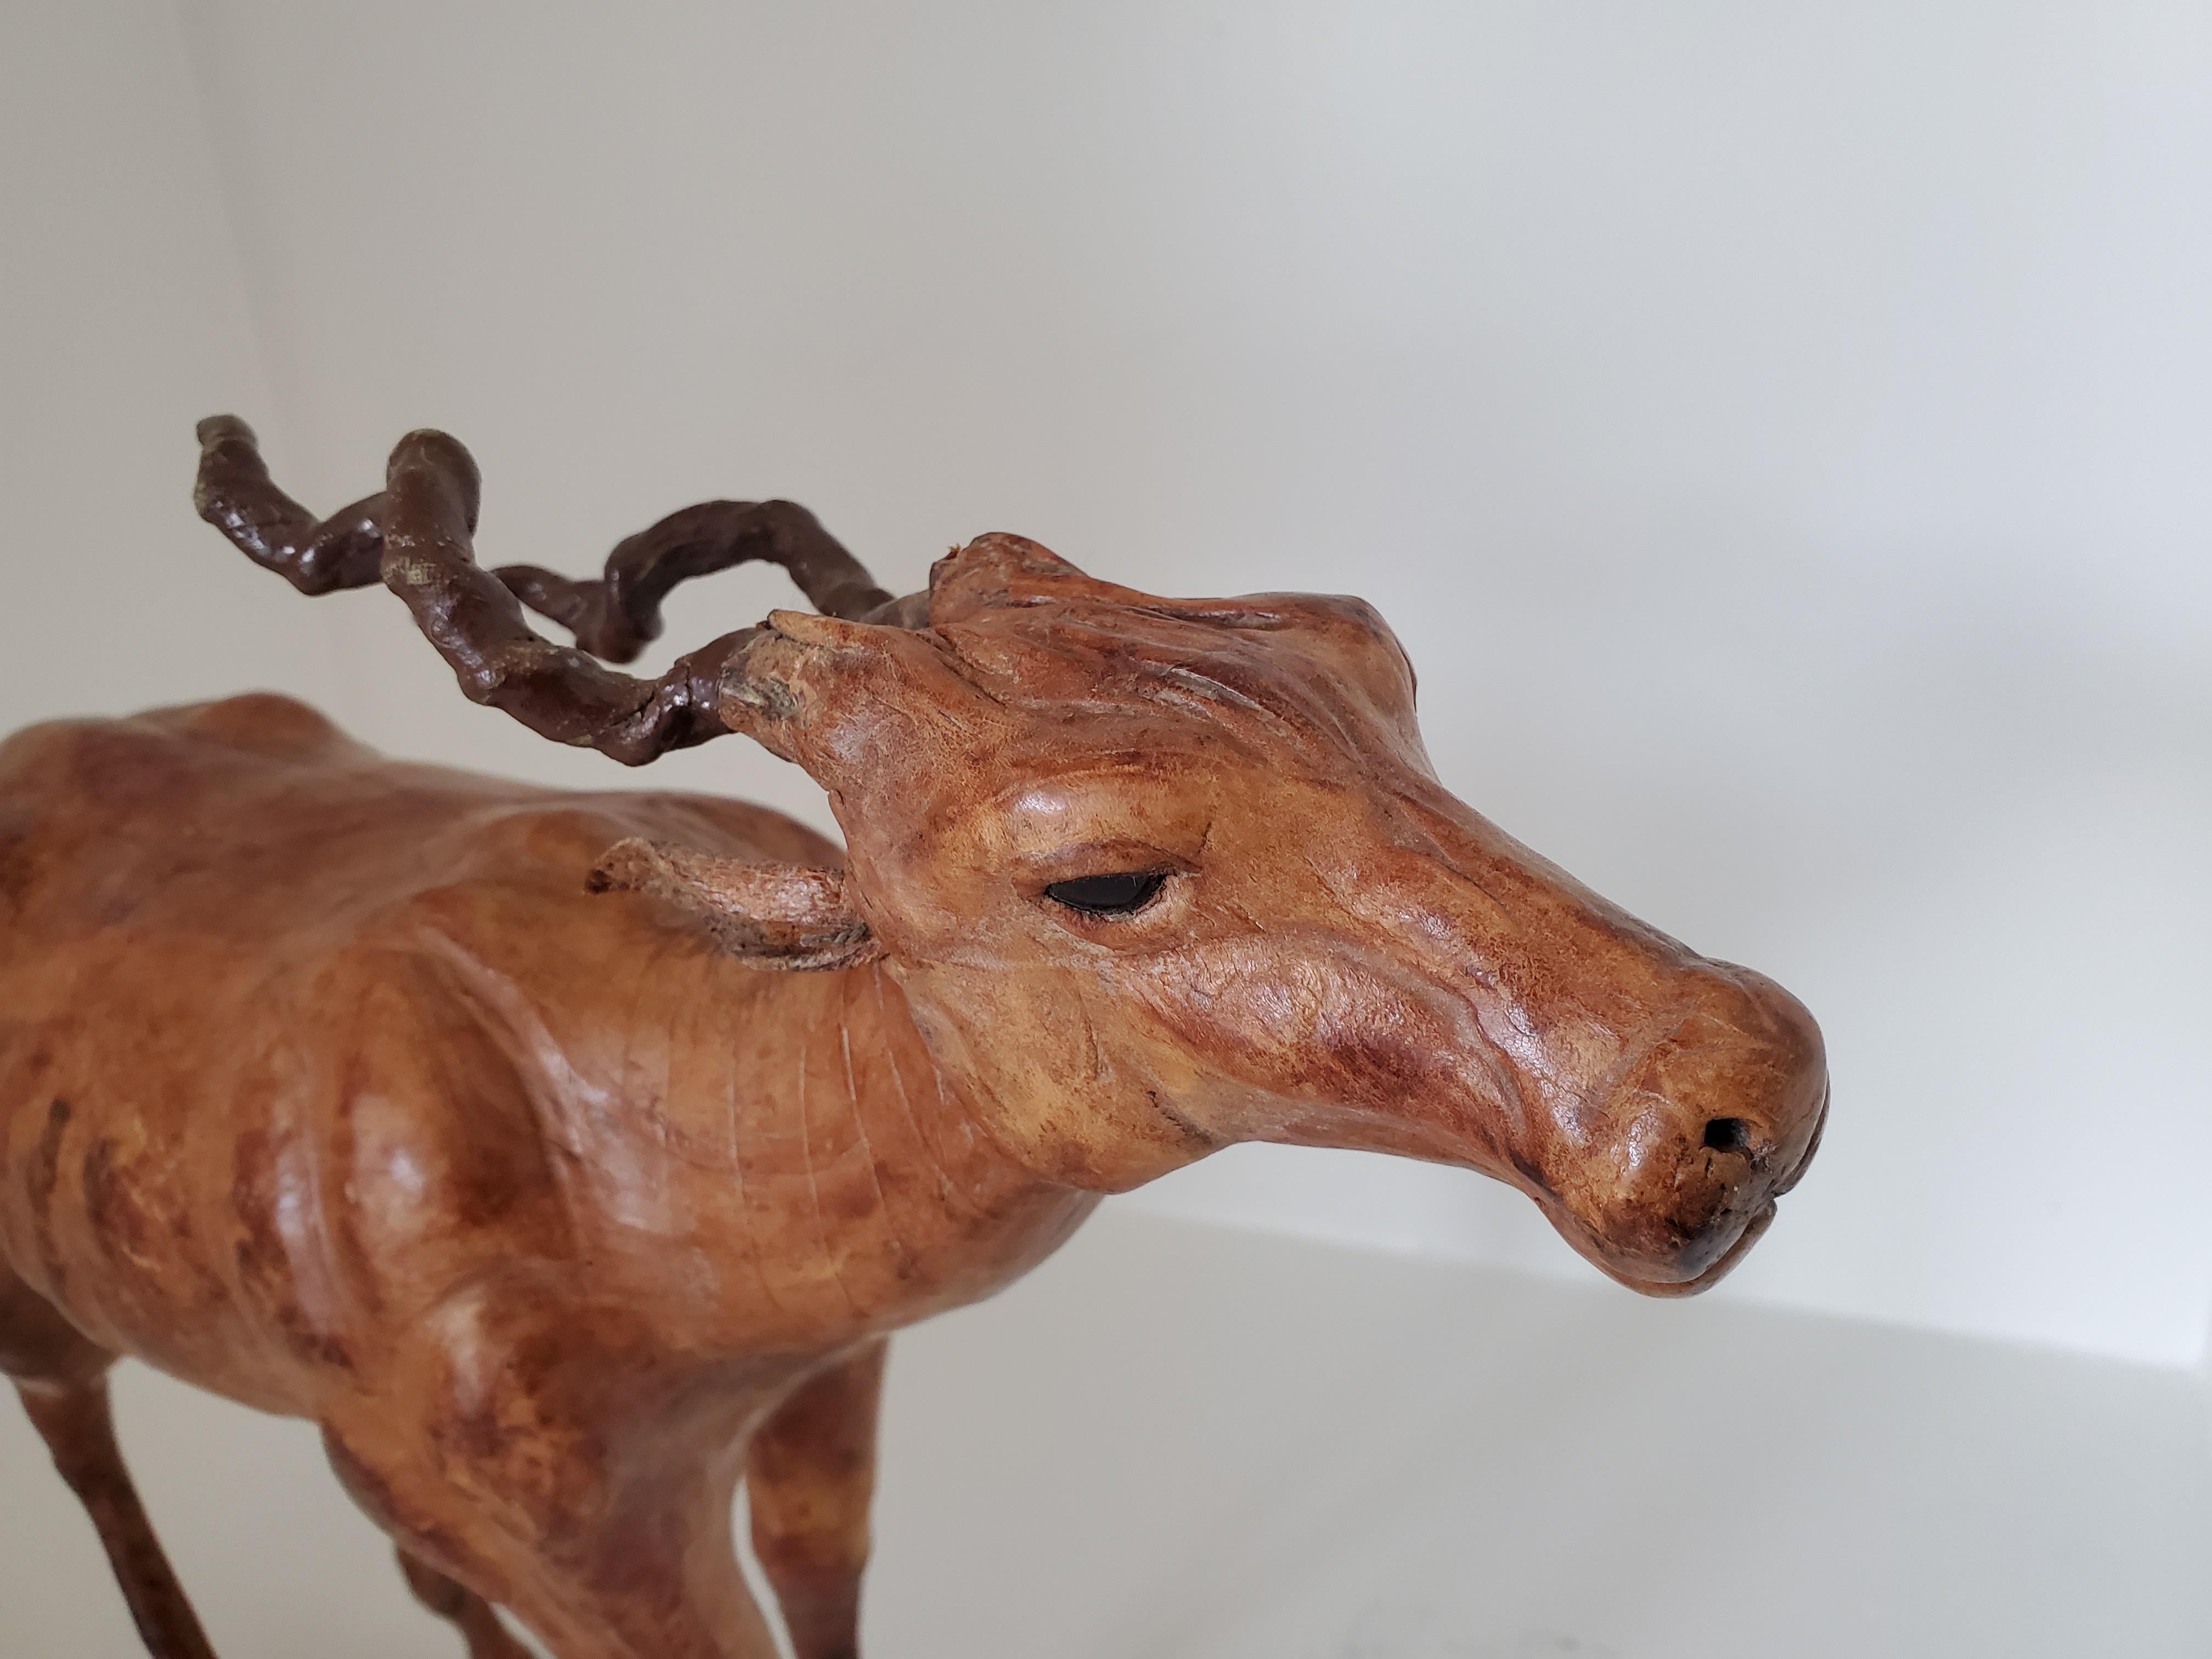 Unknown Vintage Sculpture - Wood and Leather Gazelle Likely from Liberty's London For Sale